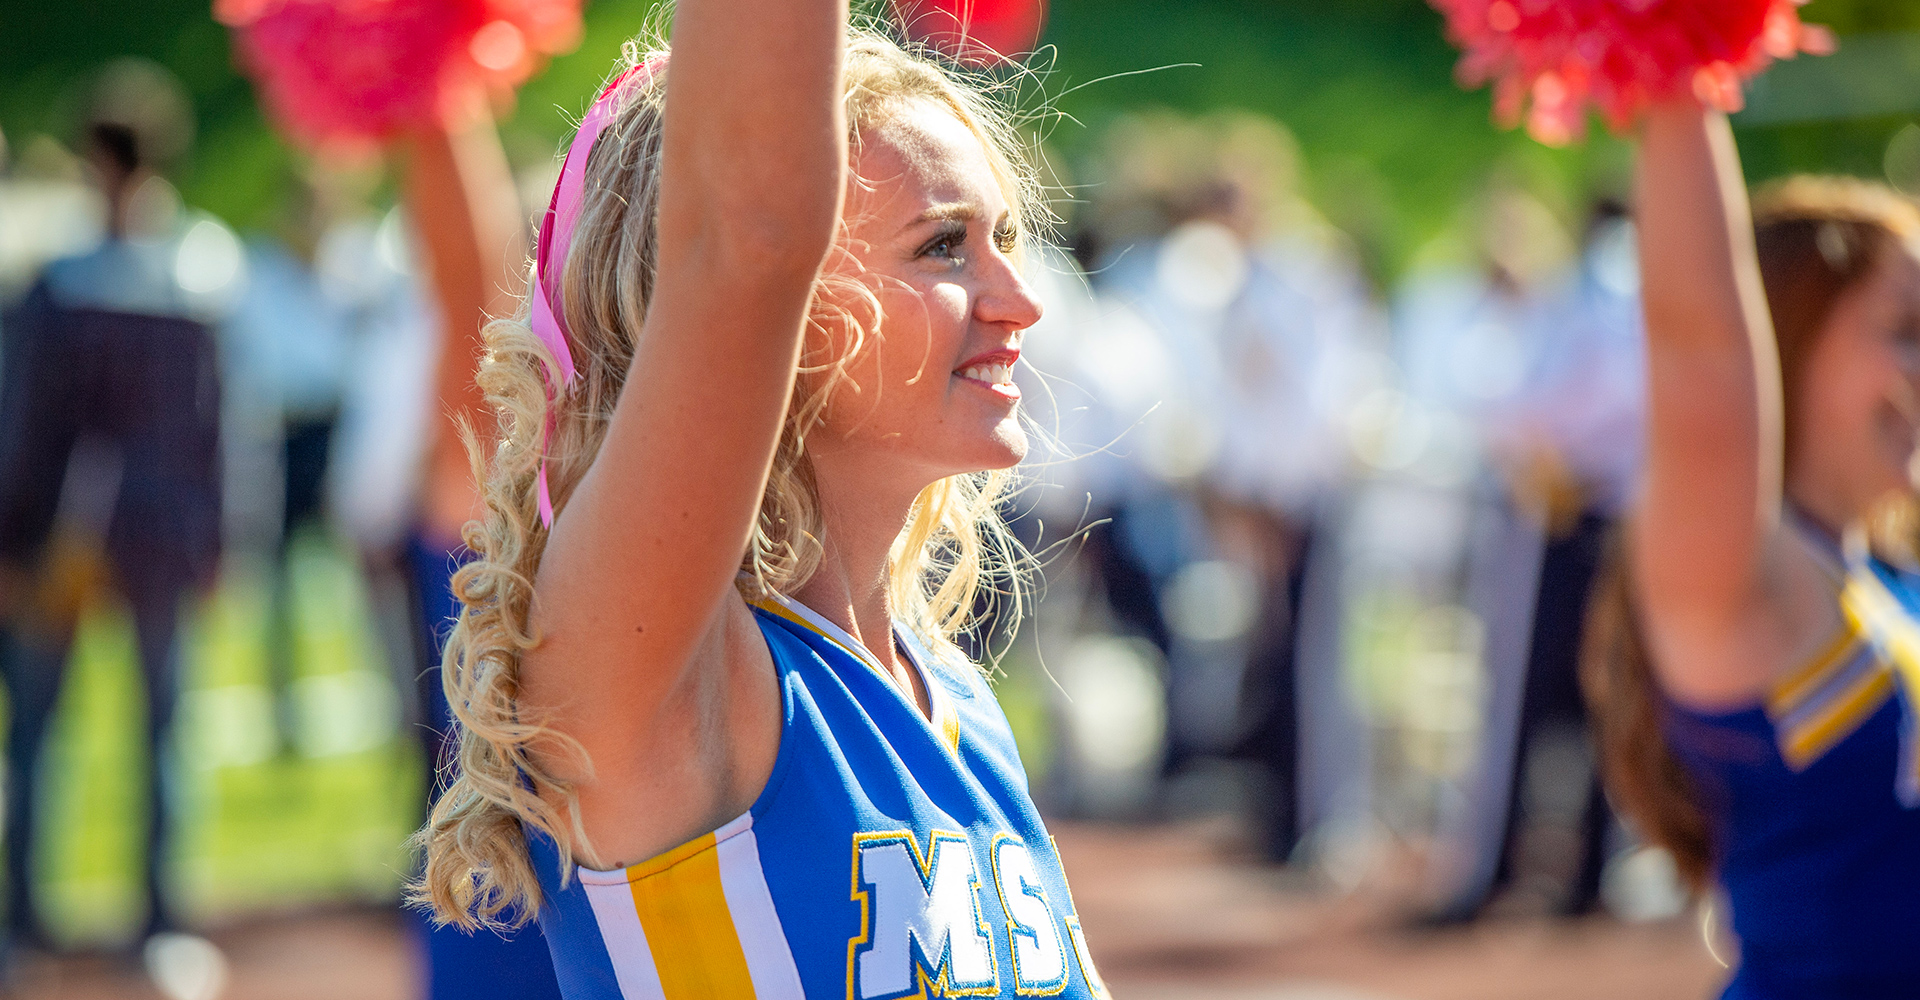 msj cheerleader raising arm with pom-pom and and smiling